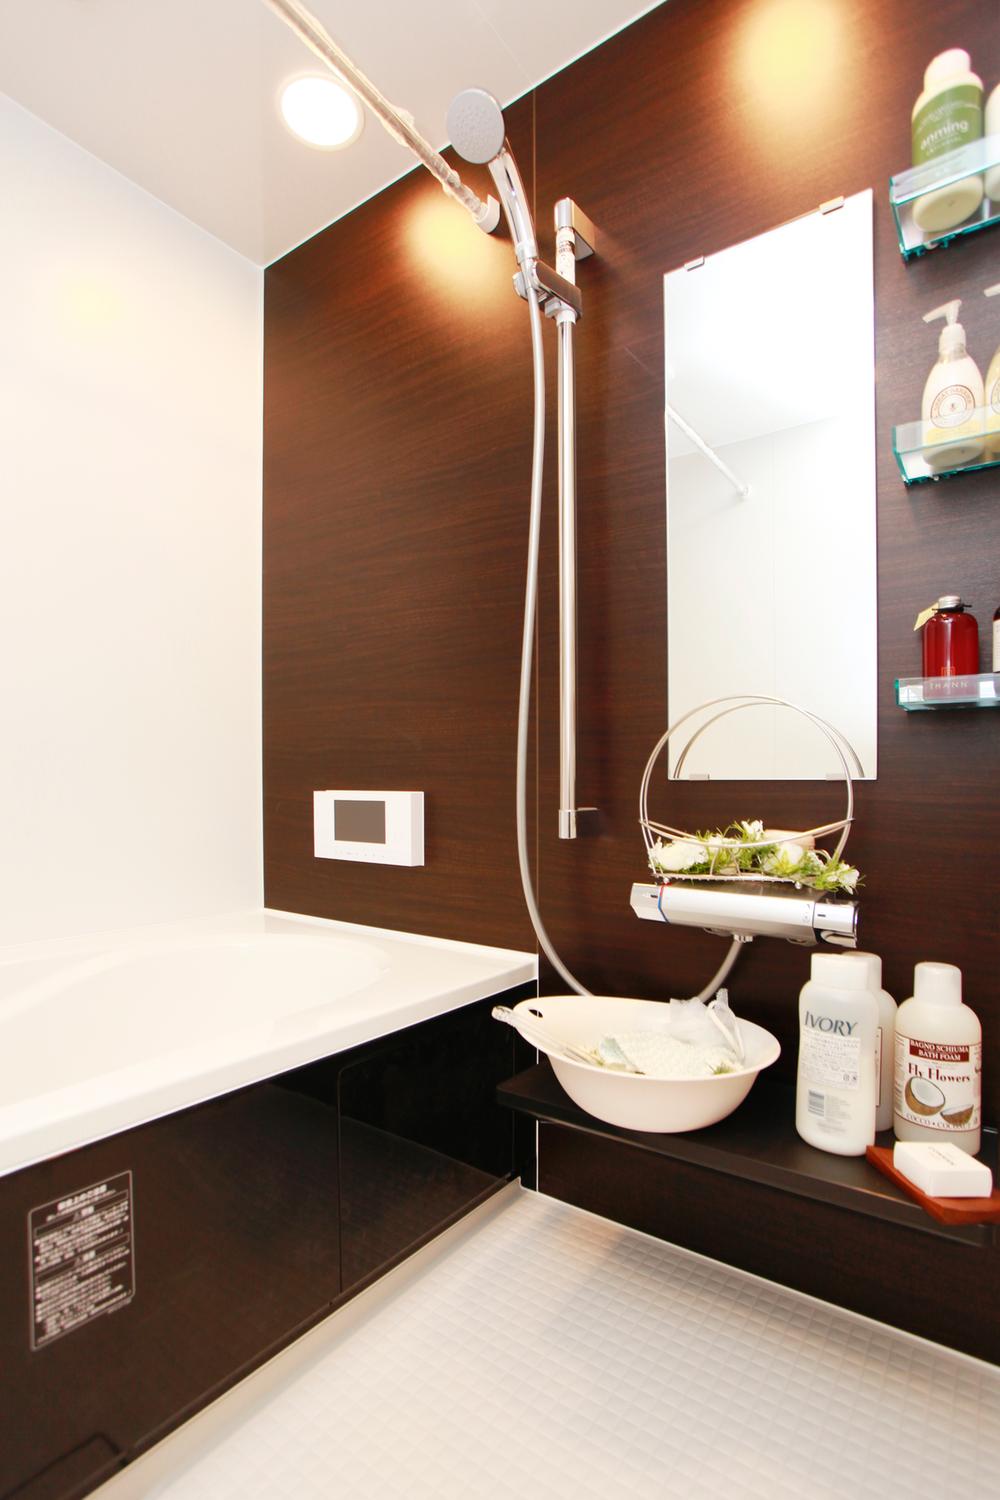 Bathroom. Bathroom TV Ya to get used to seeing while extending the leg, It has become a specification that fulfilling such as drying function. (19 Building)